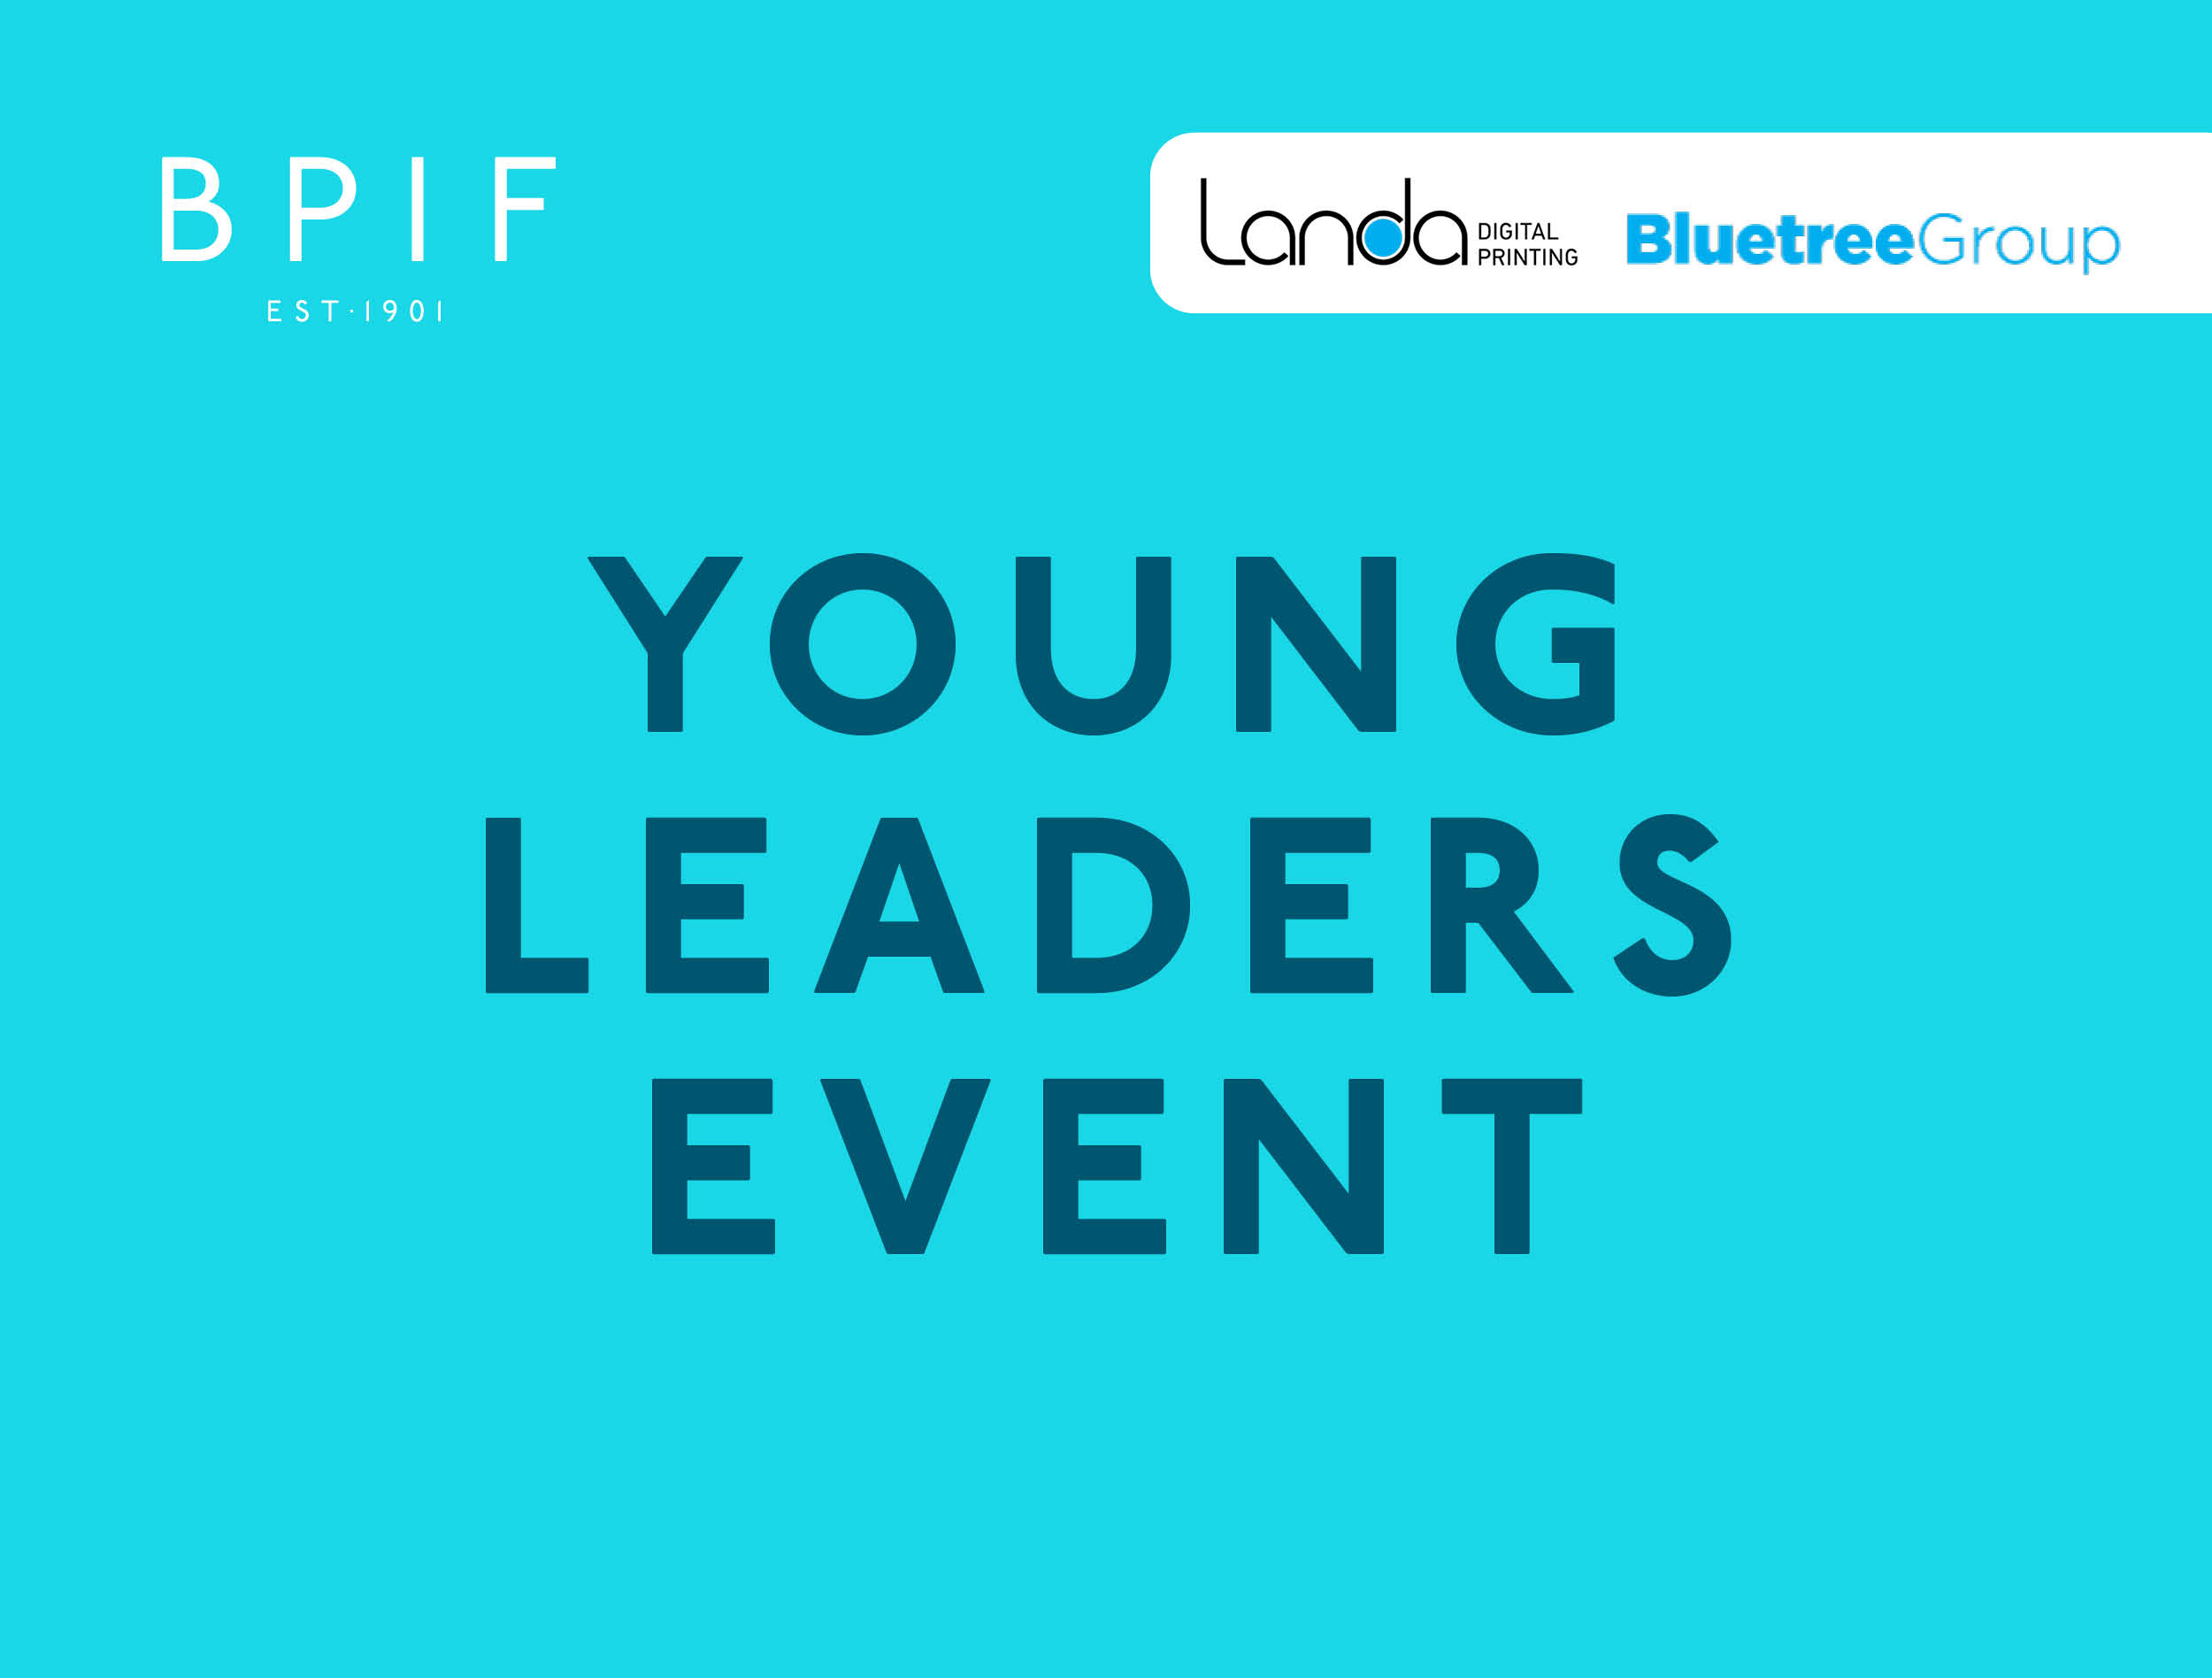 Landa & the BPIF Young Leaders Event Hosted at Bluetree Group